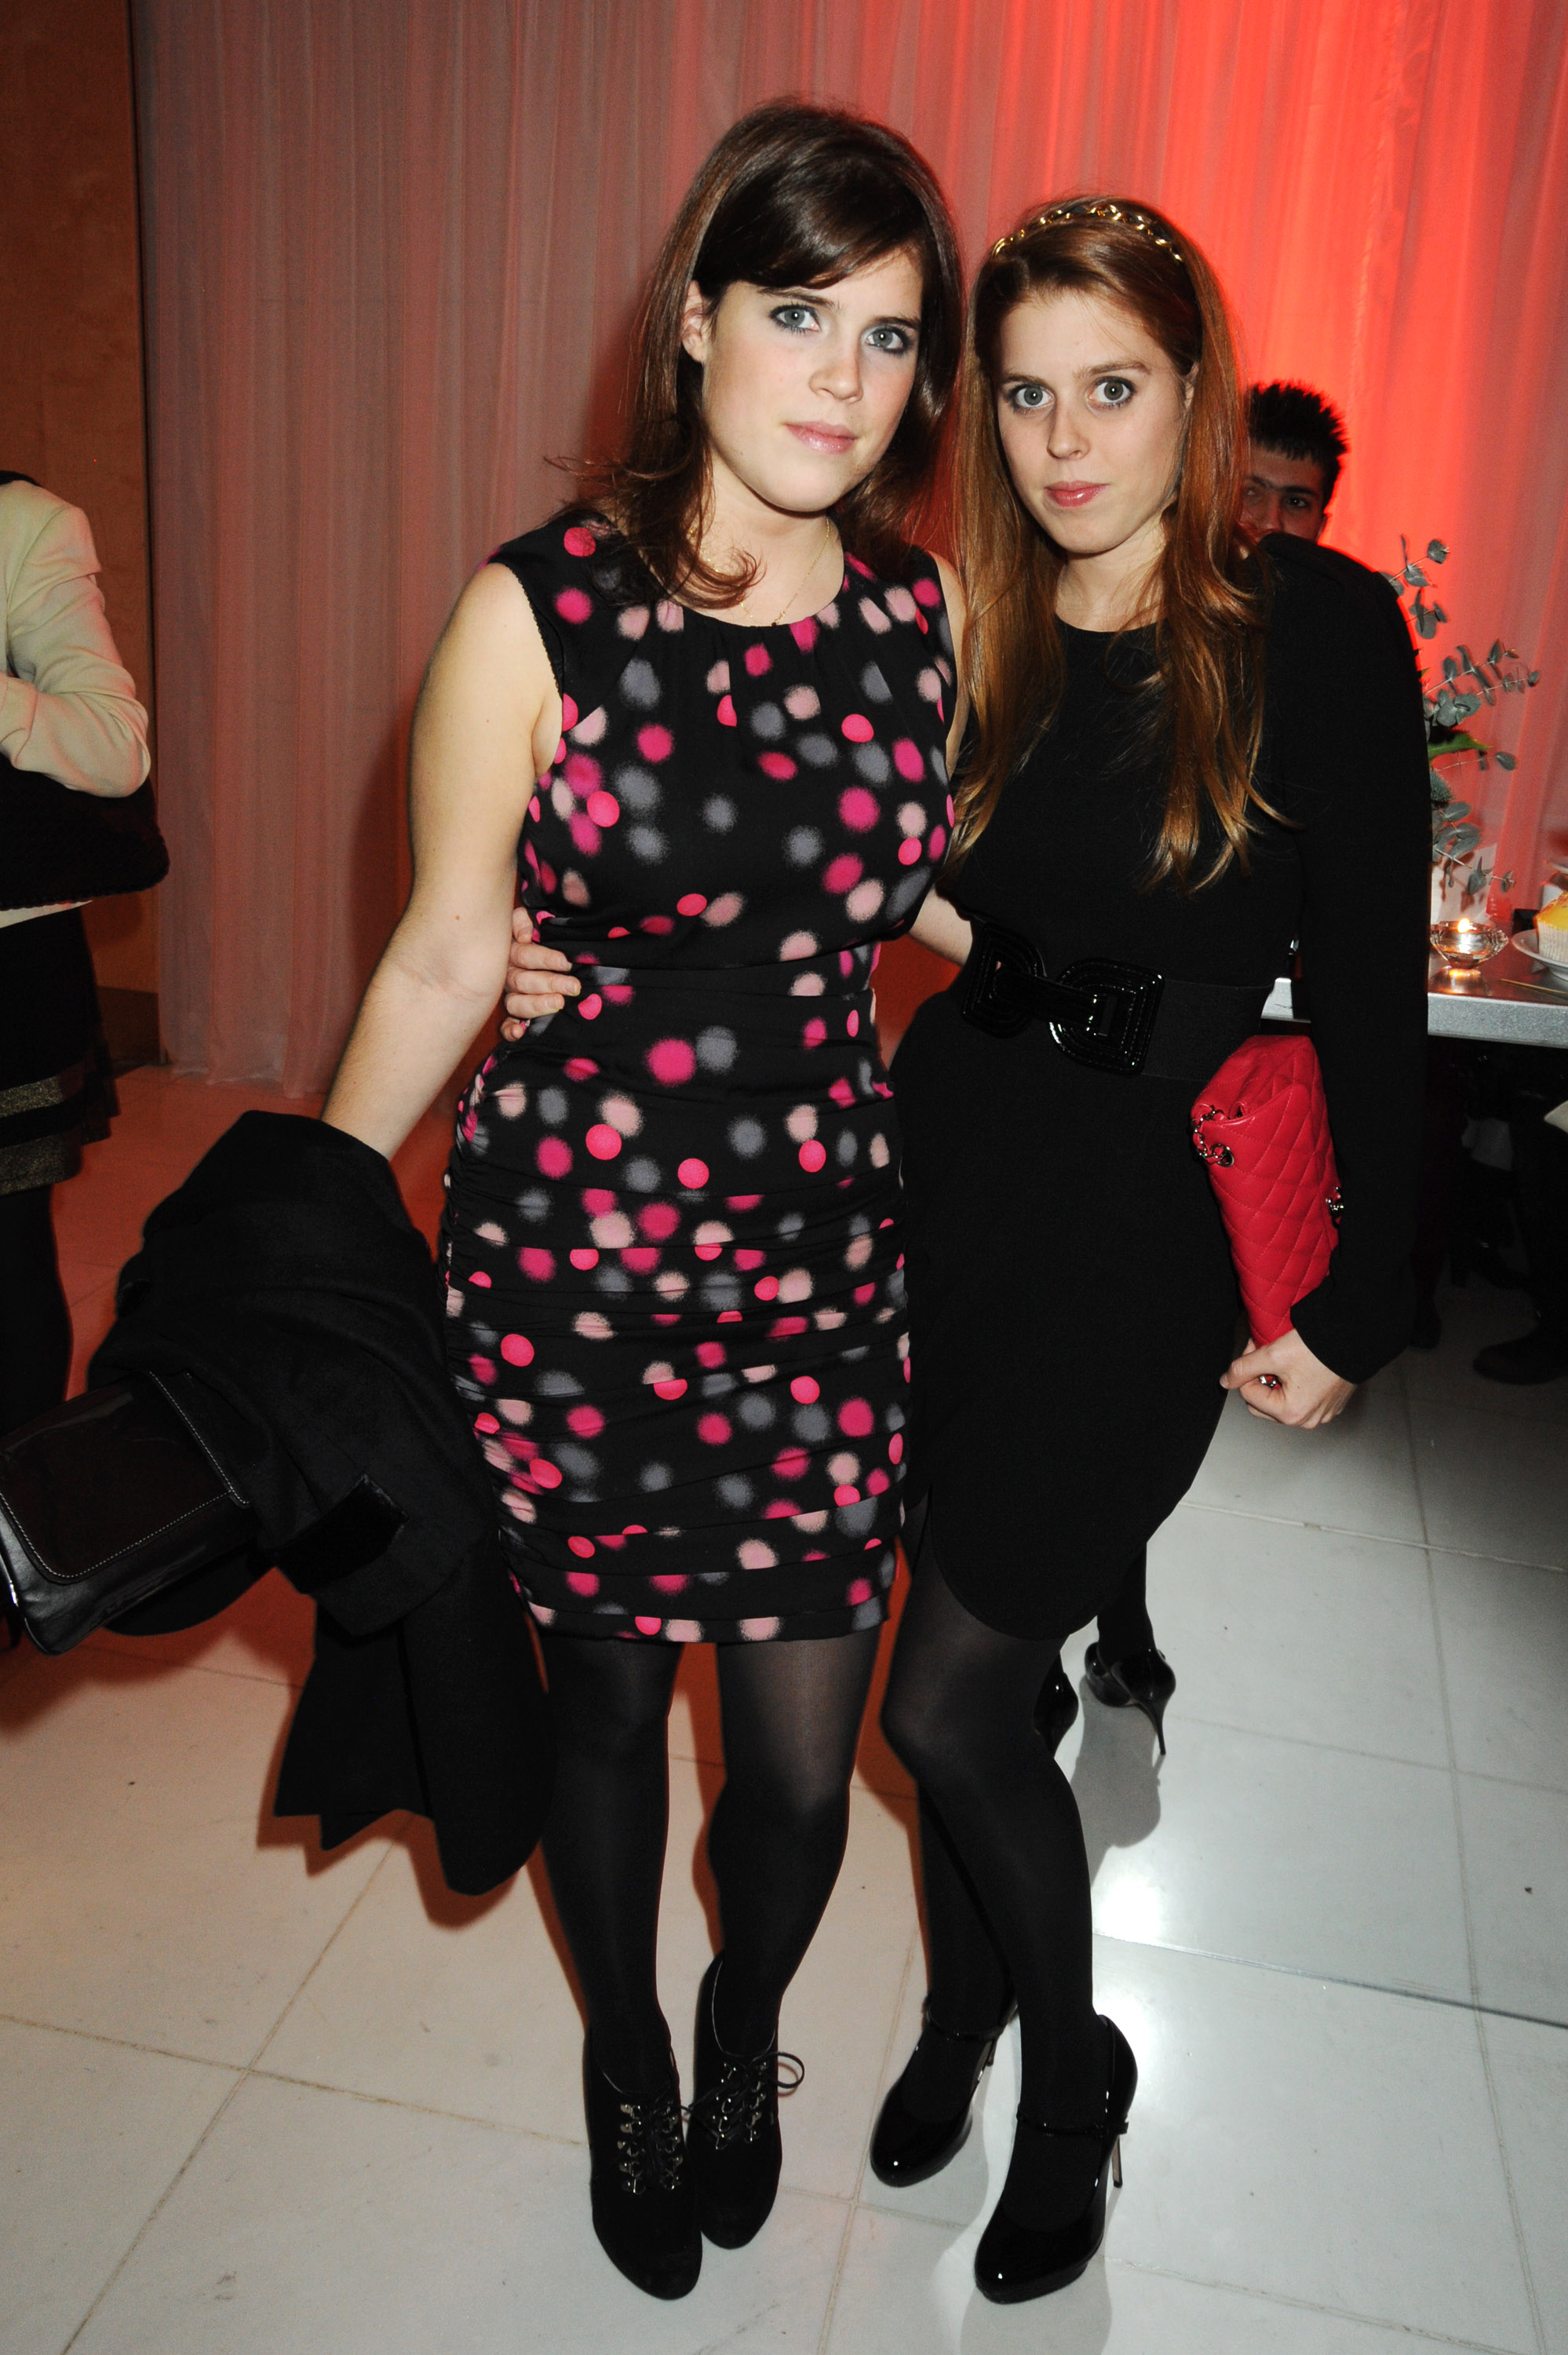 Princess Eugenie and Princess Beatrice at the VIP reception to launch the English National Ballet Christmas season in London, England on December 16, 2009 | Source: Getty Images